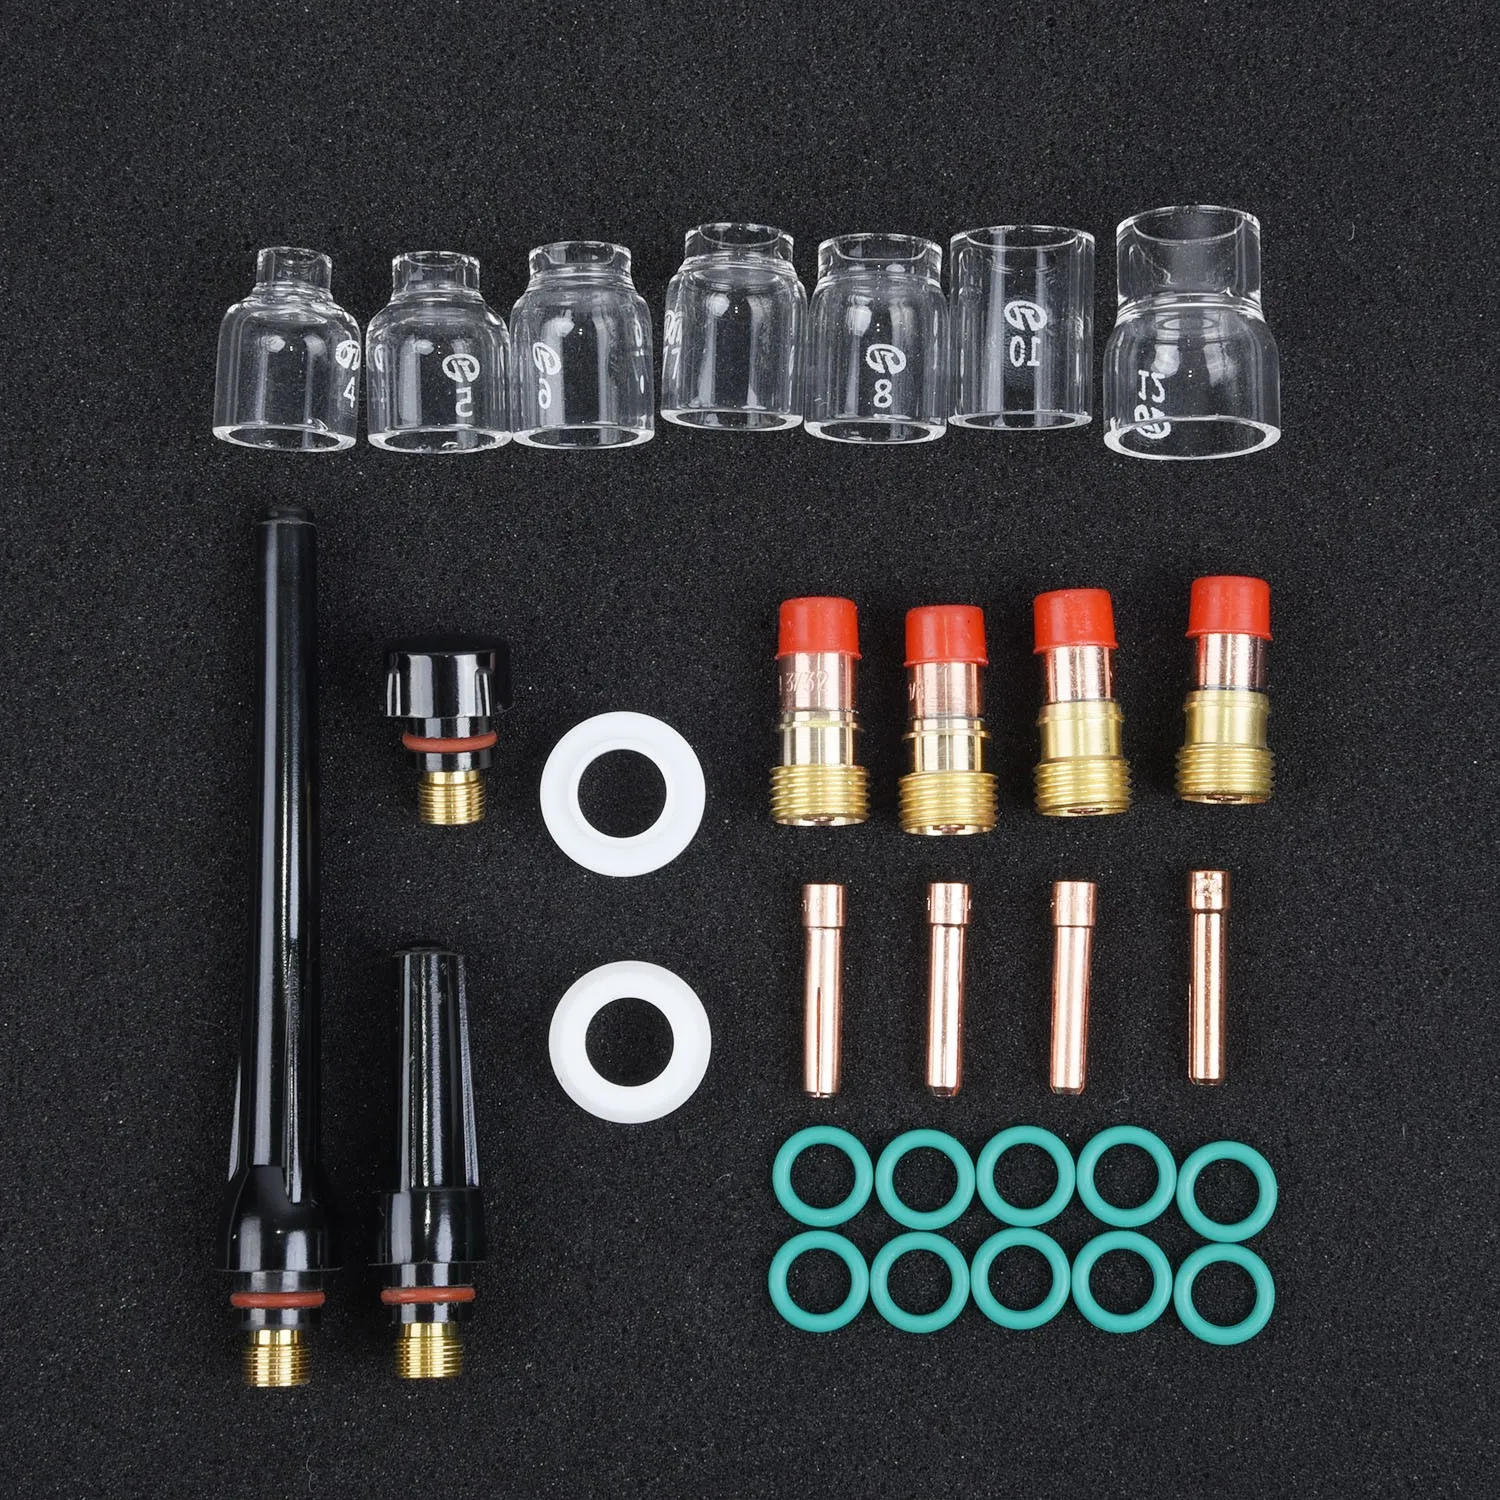 

30Pcs TIG Welding Torch Stubby Gas Lens 12# Pyrex Glass Cup Kit For WP-17/18/26 One Set TIG Welding Torch Accessories